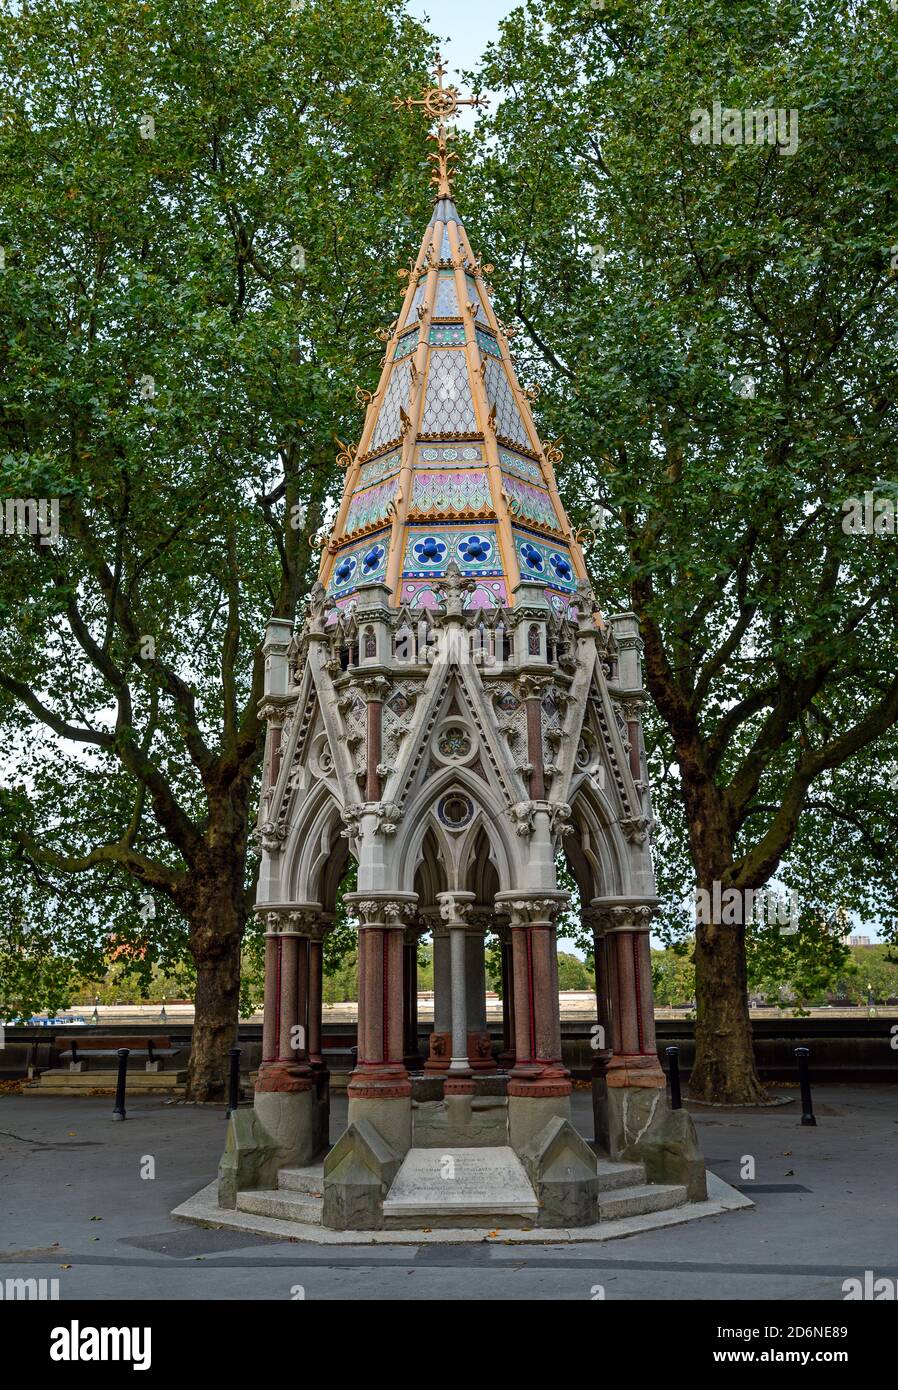 Buxton Memorial Fountain in Victoria Tower Gardens, Westminster, London, UK. This water fountain commemorates the emancipation of slaves in 1834. Stock Photo